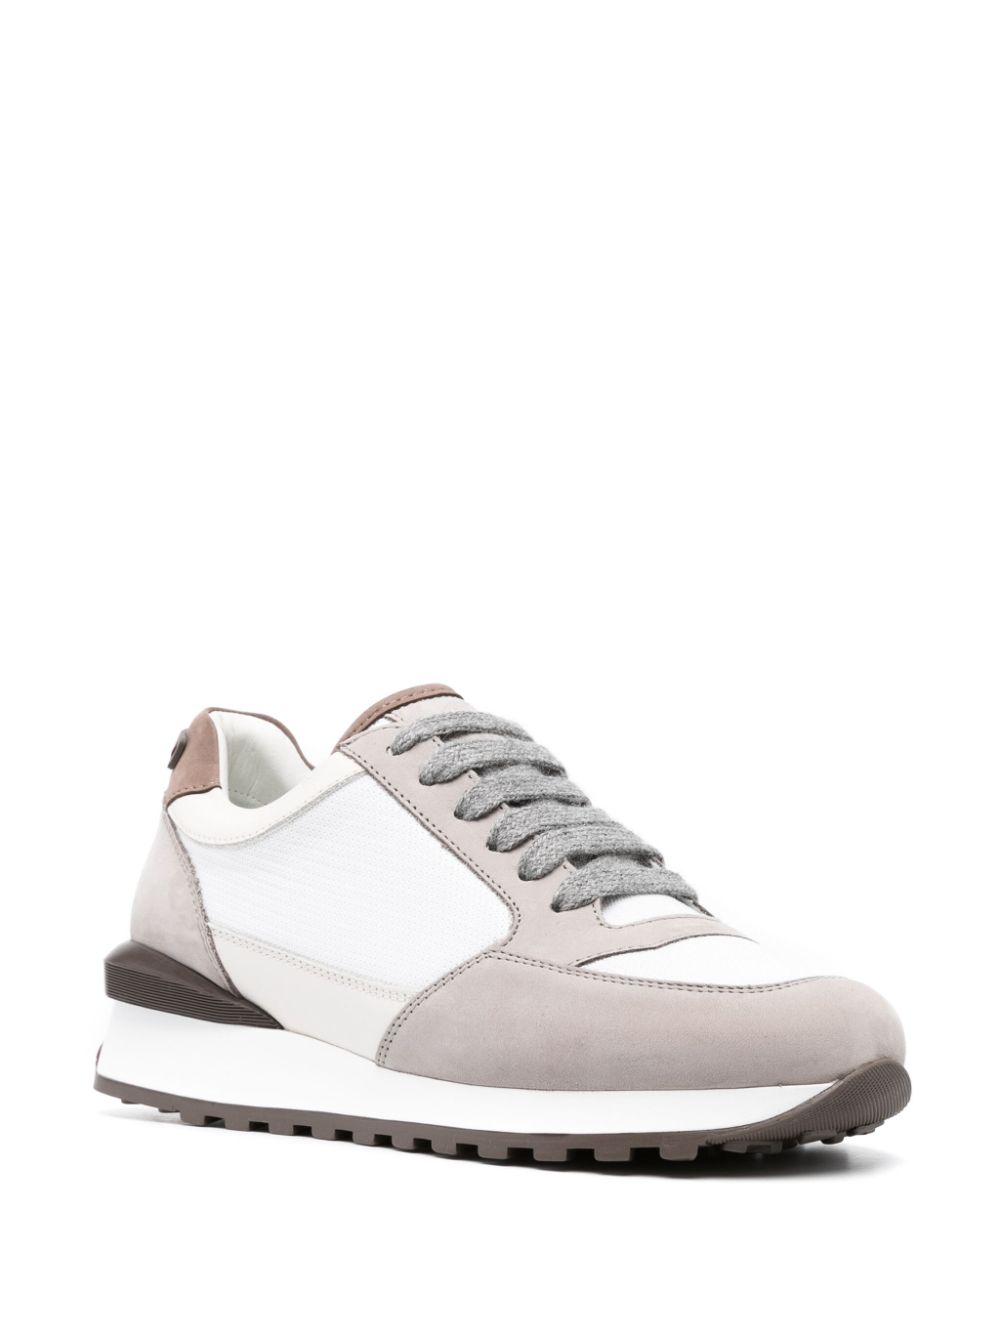 Peserico lace-up Leather Sneakers - Farfetch